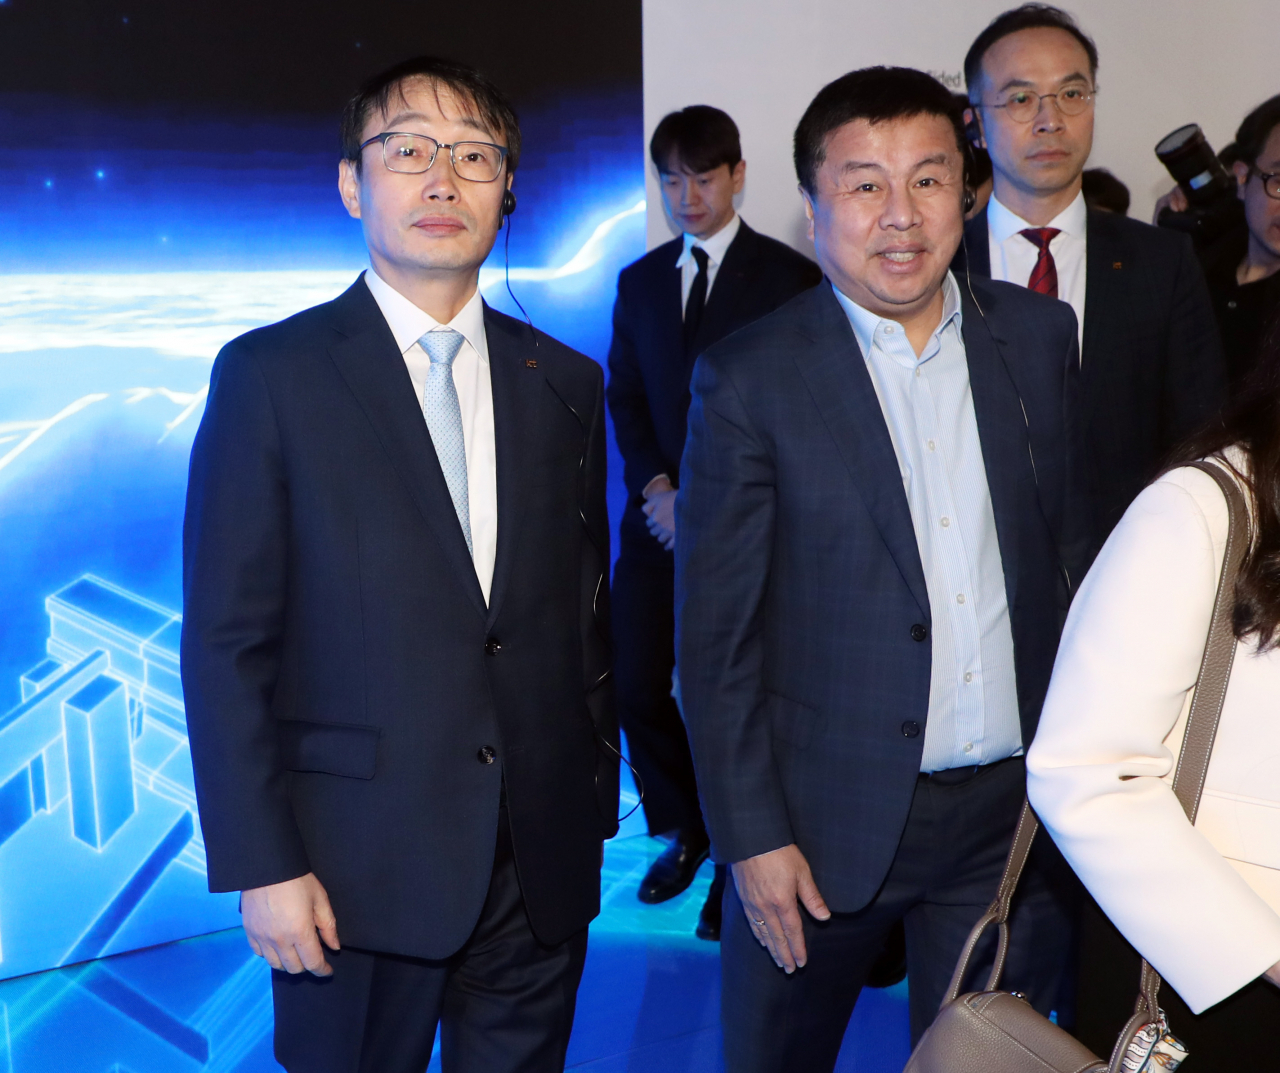 KT Corp. CEO Ku Hyeon-mo (left) gets together with the Philippines’ fiber internet provider Converge ICT Solutions CEO Dennis Anthony Uy to explore the company's booth at the annual Mobile World Congress in Barcelona, Spain, Monday. (Yonhap)